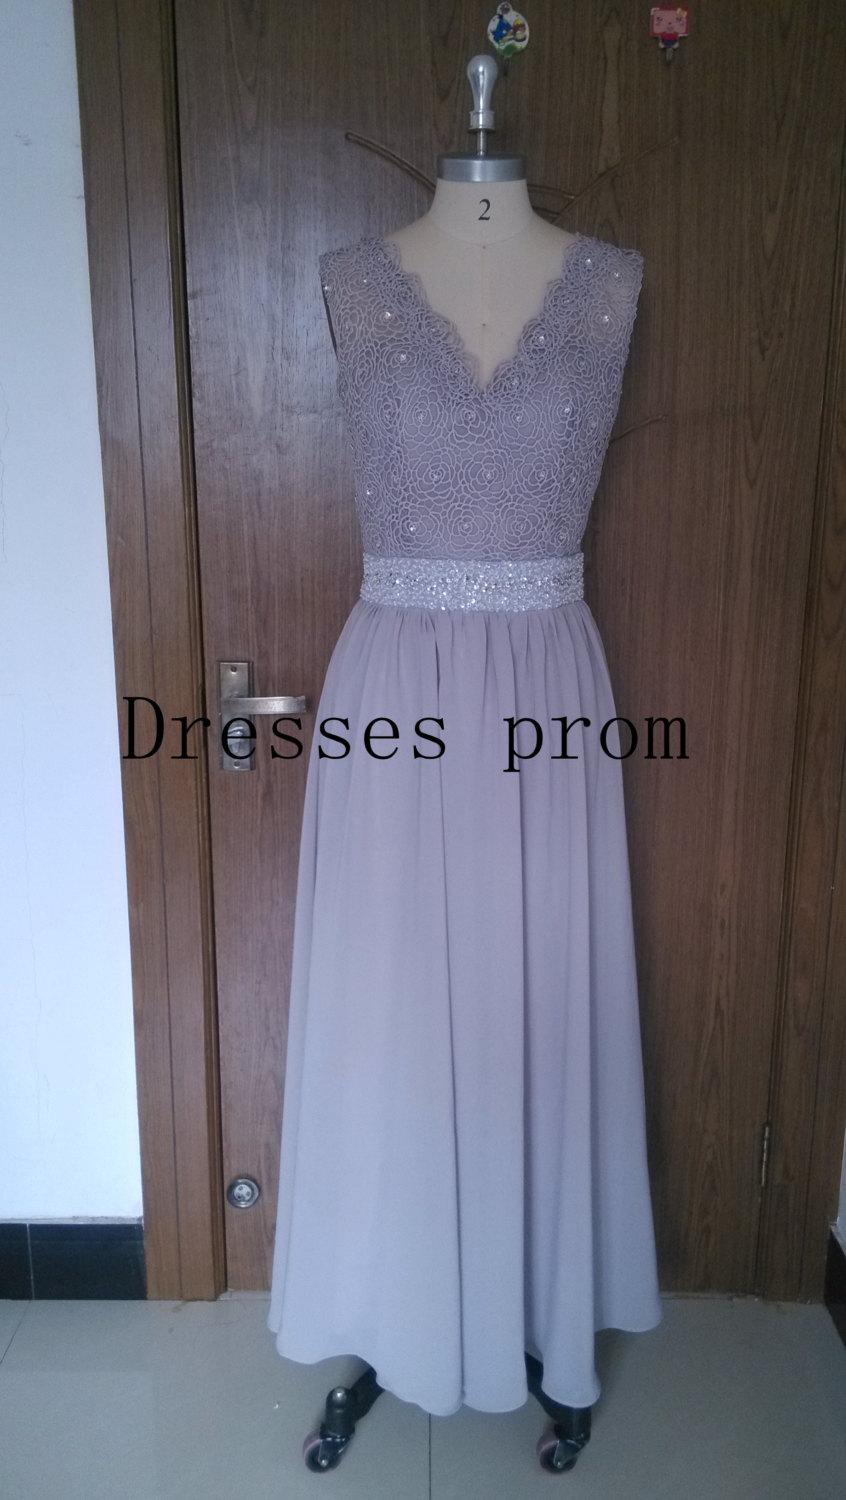 Wedding - Grey Long Lace Bridesmaid Dress A-line Chiffon Dress With cap sleeves and open back prom dress